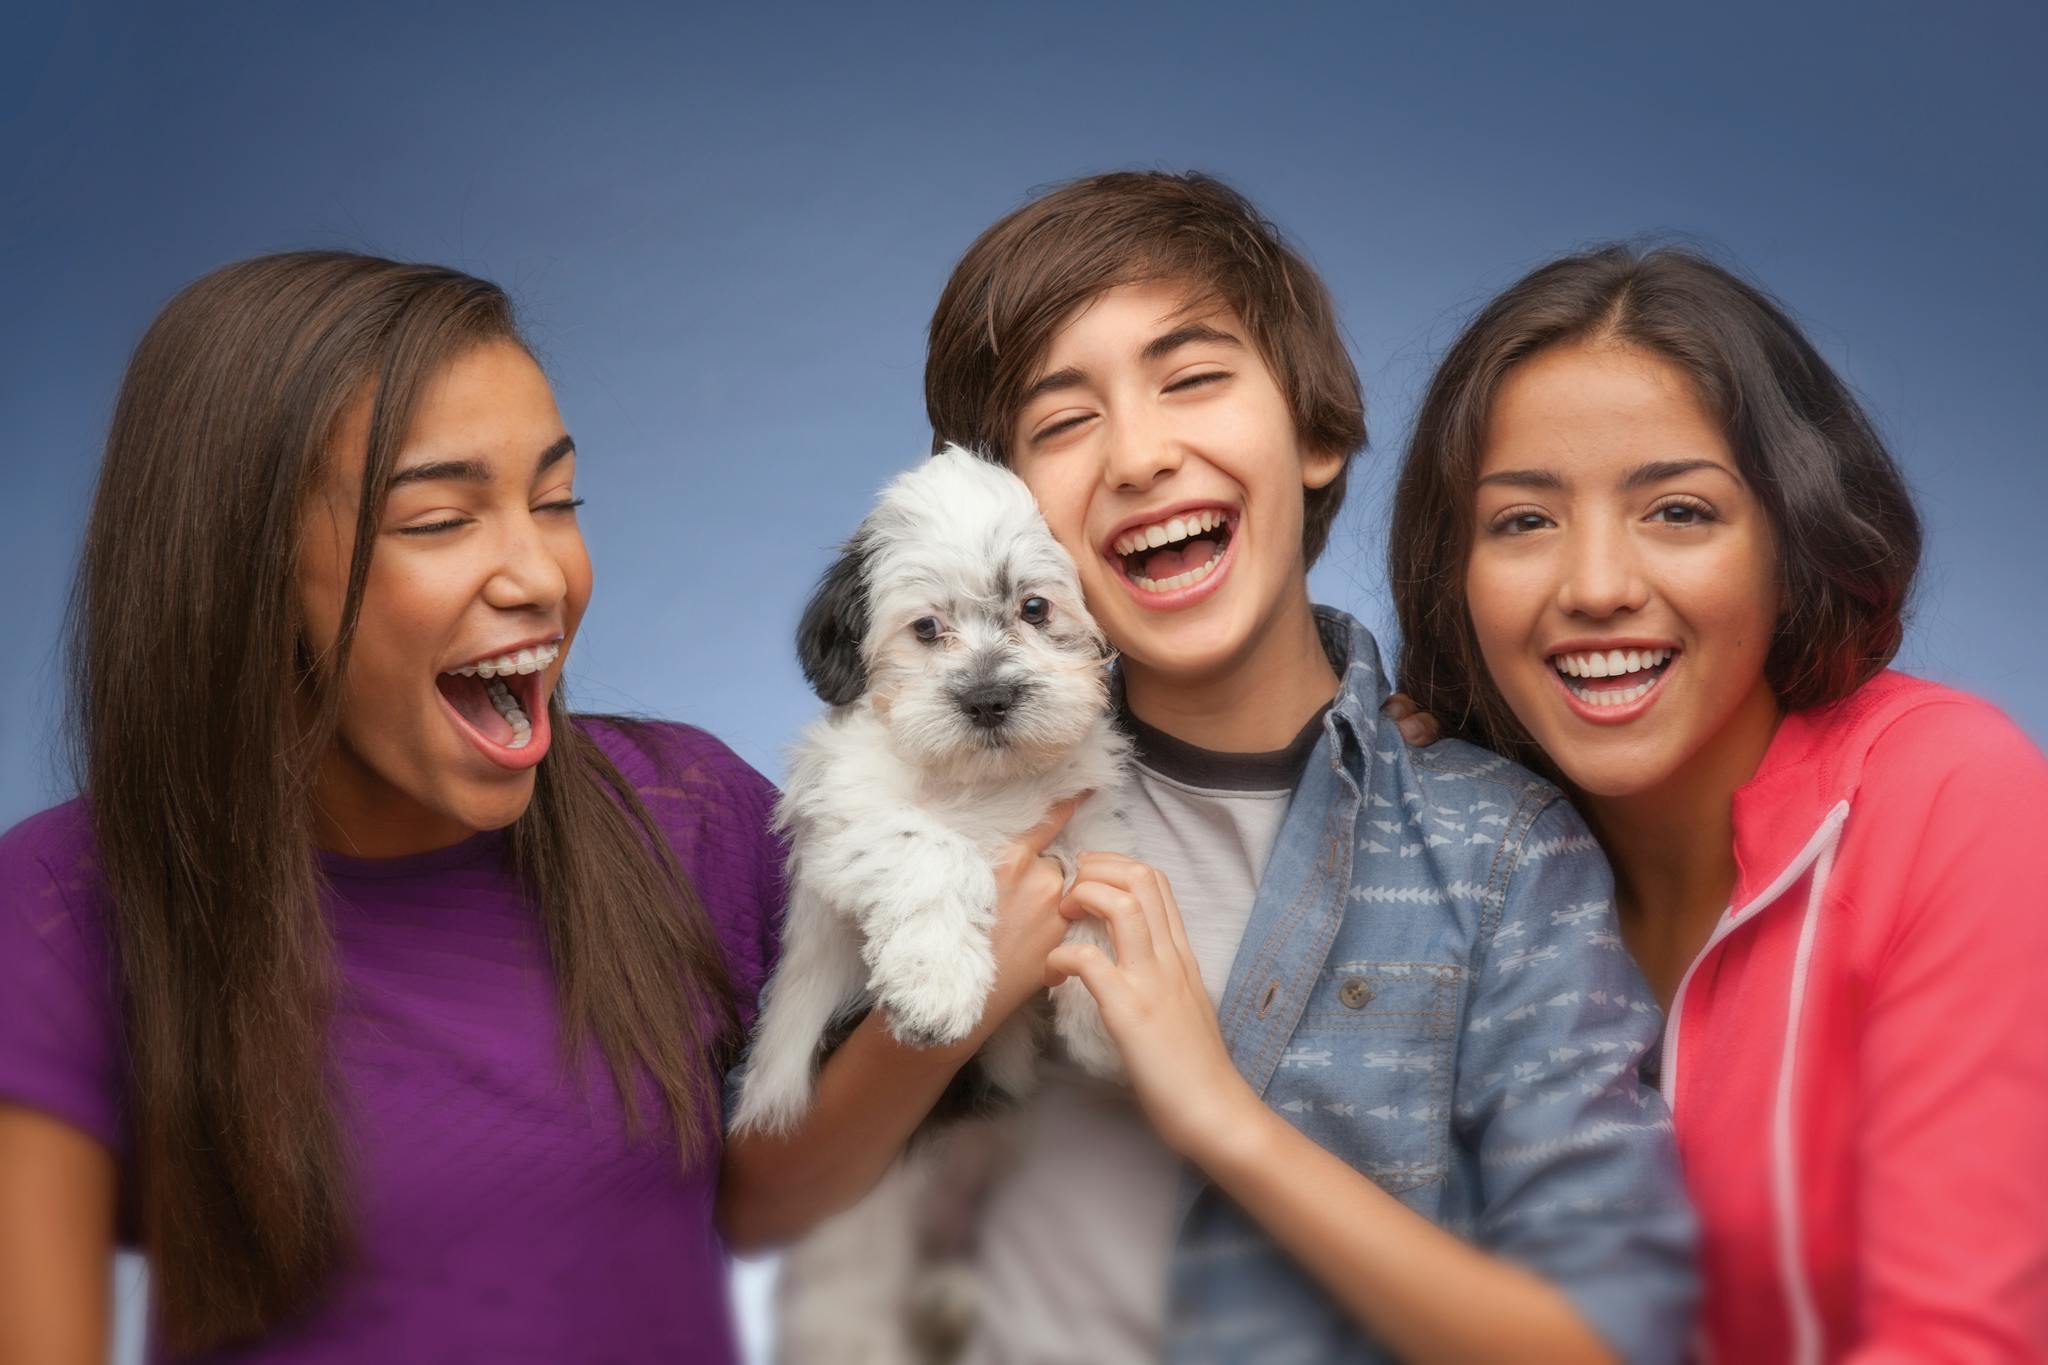 young people smiling with a dog